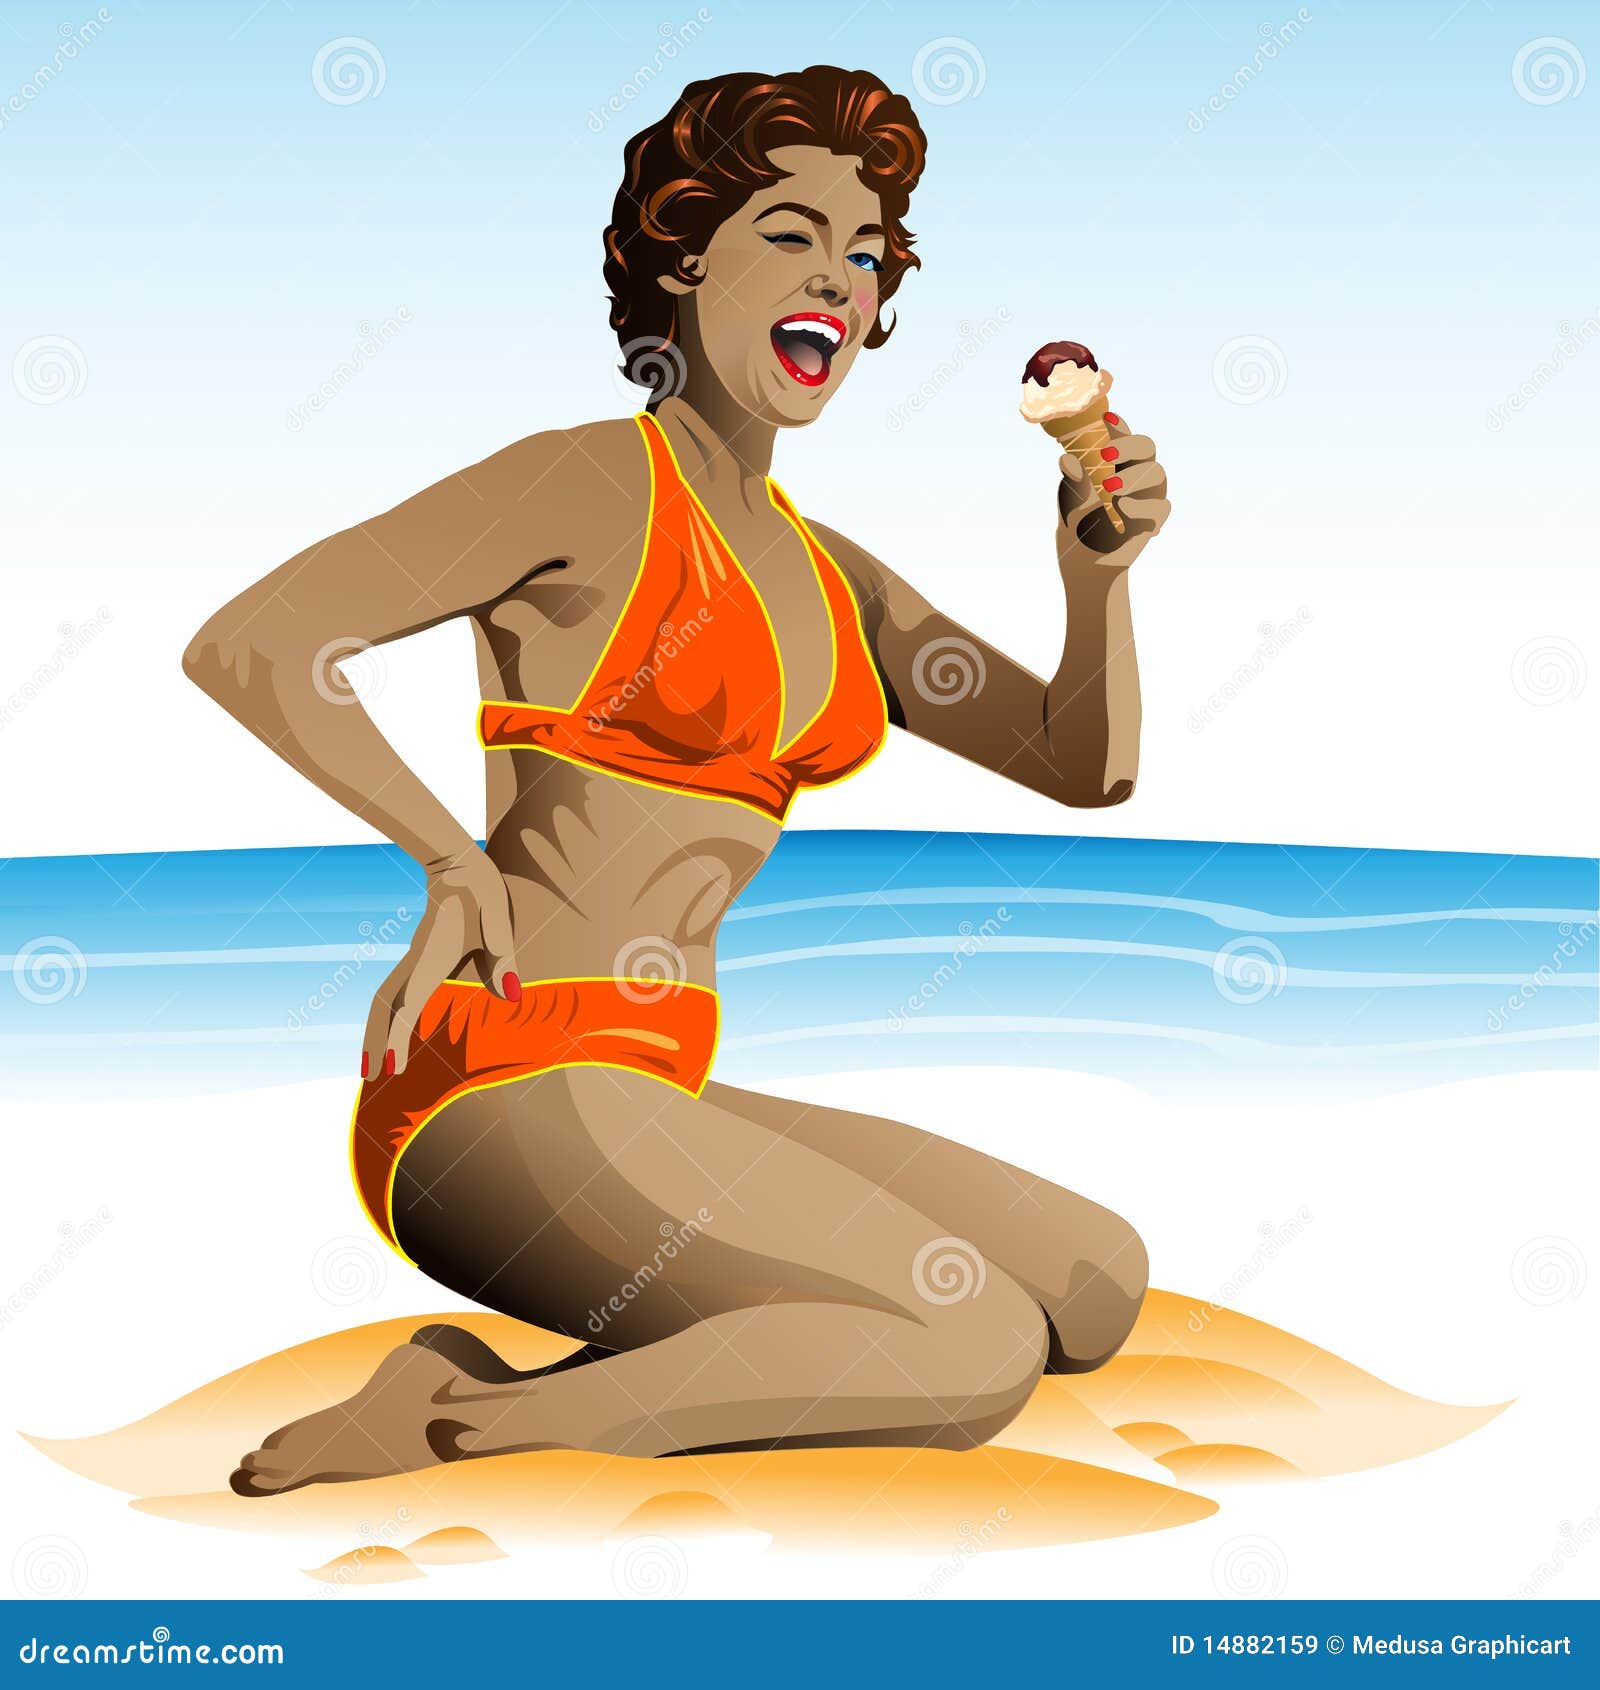 Summer Pin Up With Ice Cream Royalty Free Stock Images